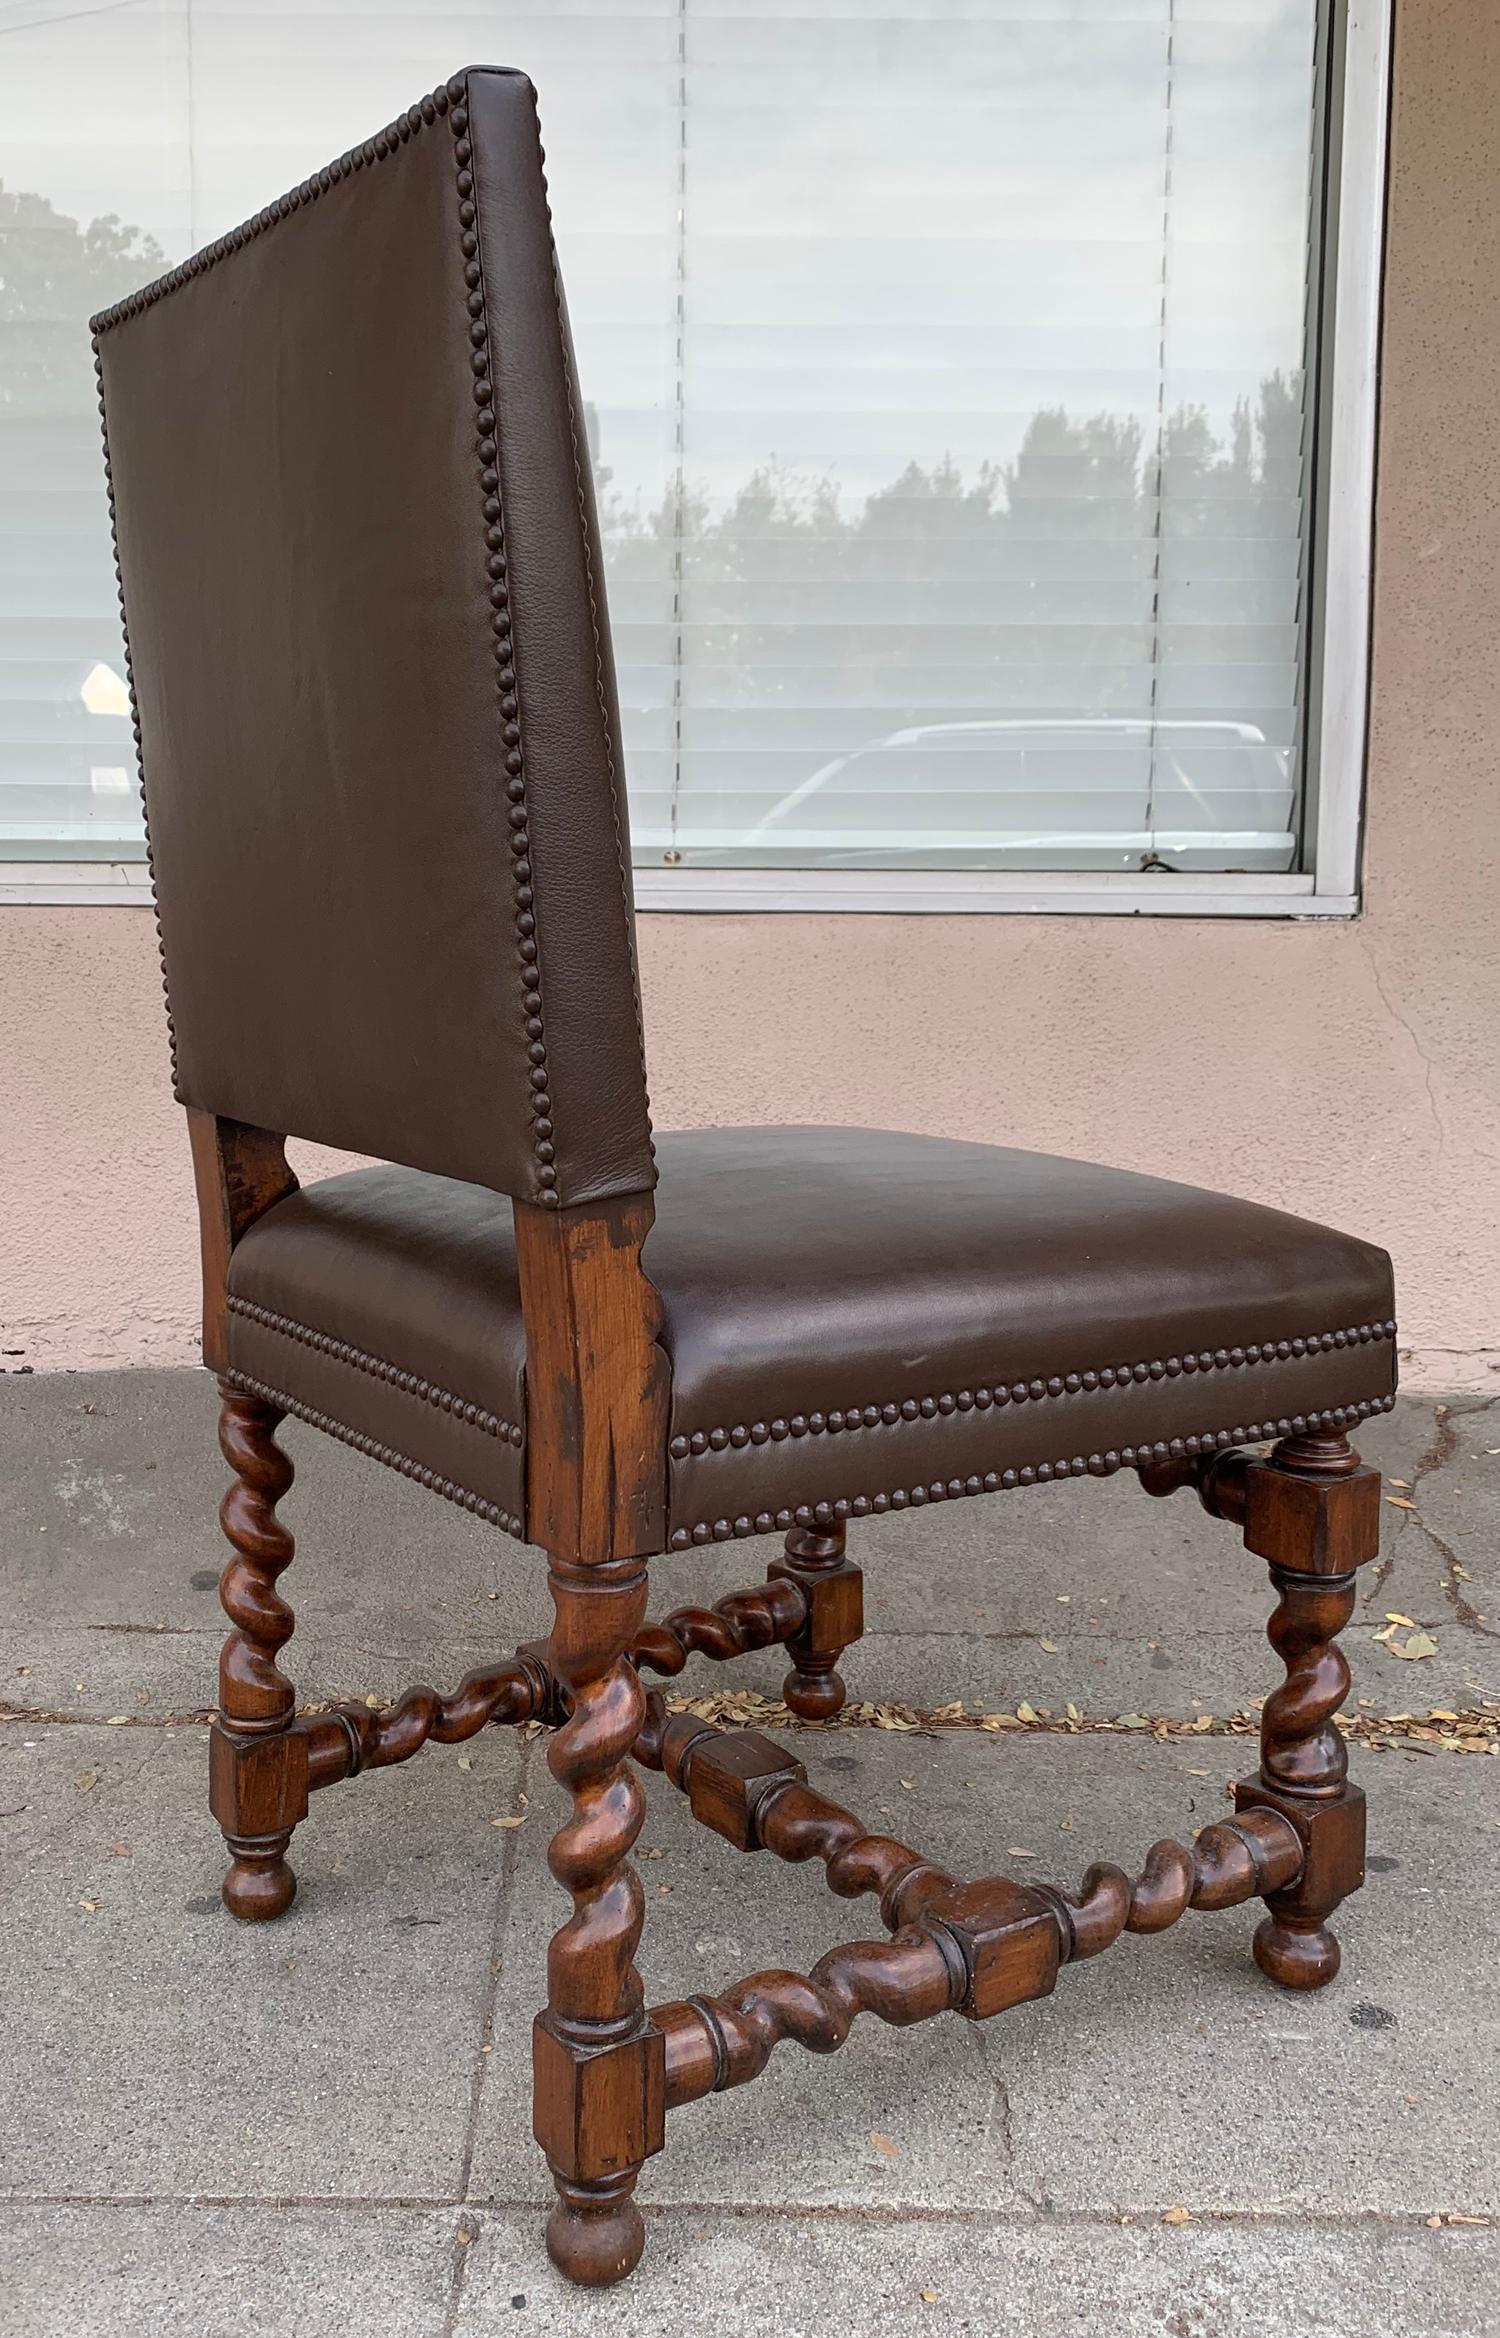 Nice set of 6 vintage chairs designed and manufactured in the US in the 1960s, they have beautifully sculpted legs/bases, the leather is a chocolate brown with a nailhead trimming.
The chairs are in very good condition and are ready to be